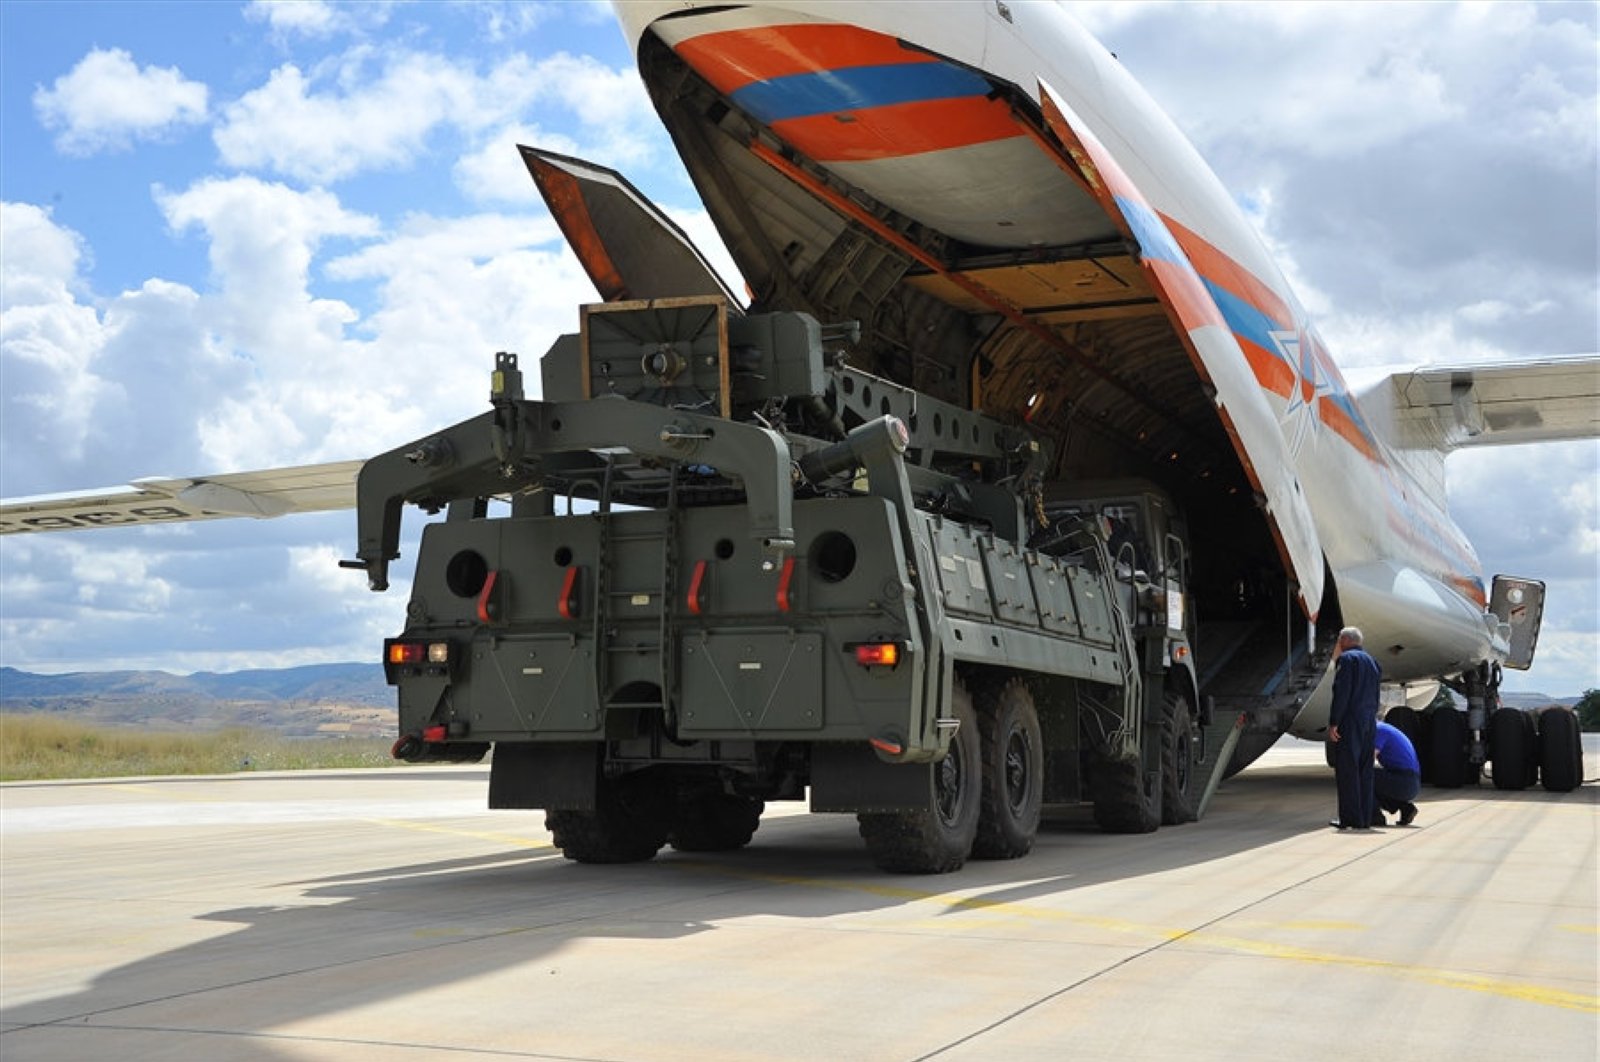 Photo released by Turkey's National Defense Ministry shows the delivery of the first batch of S-400 air defense systems, Ankara, June 13, 2019. (DHA Photo)